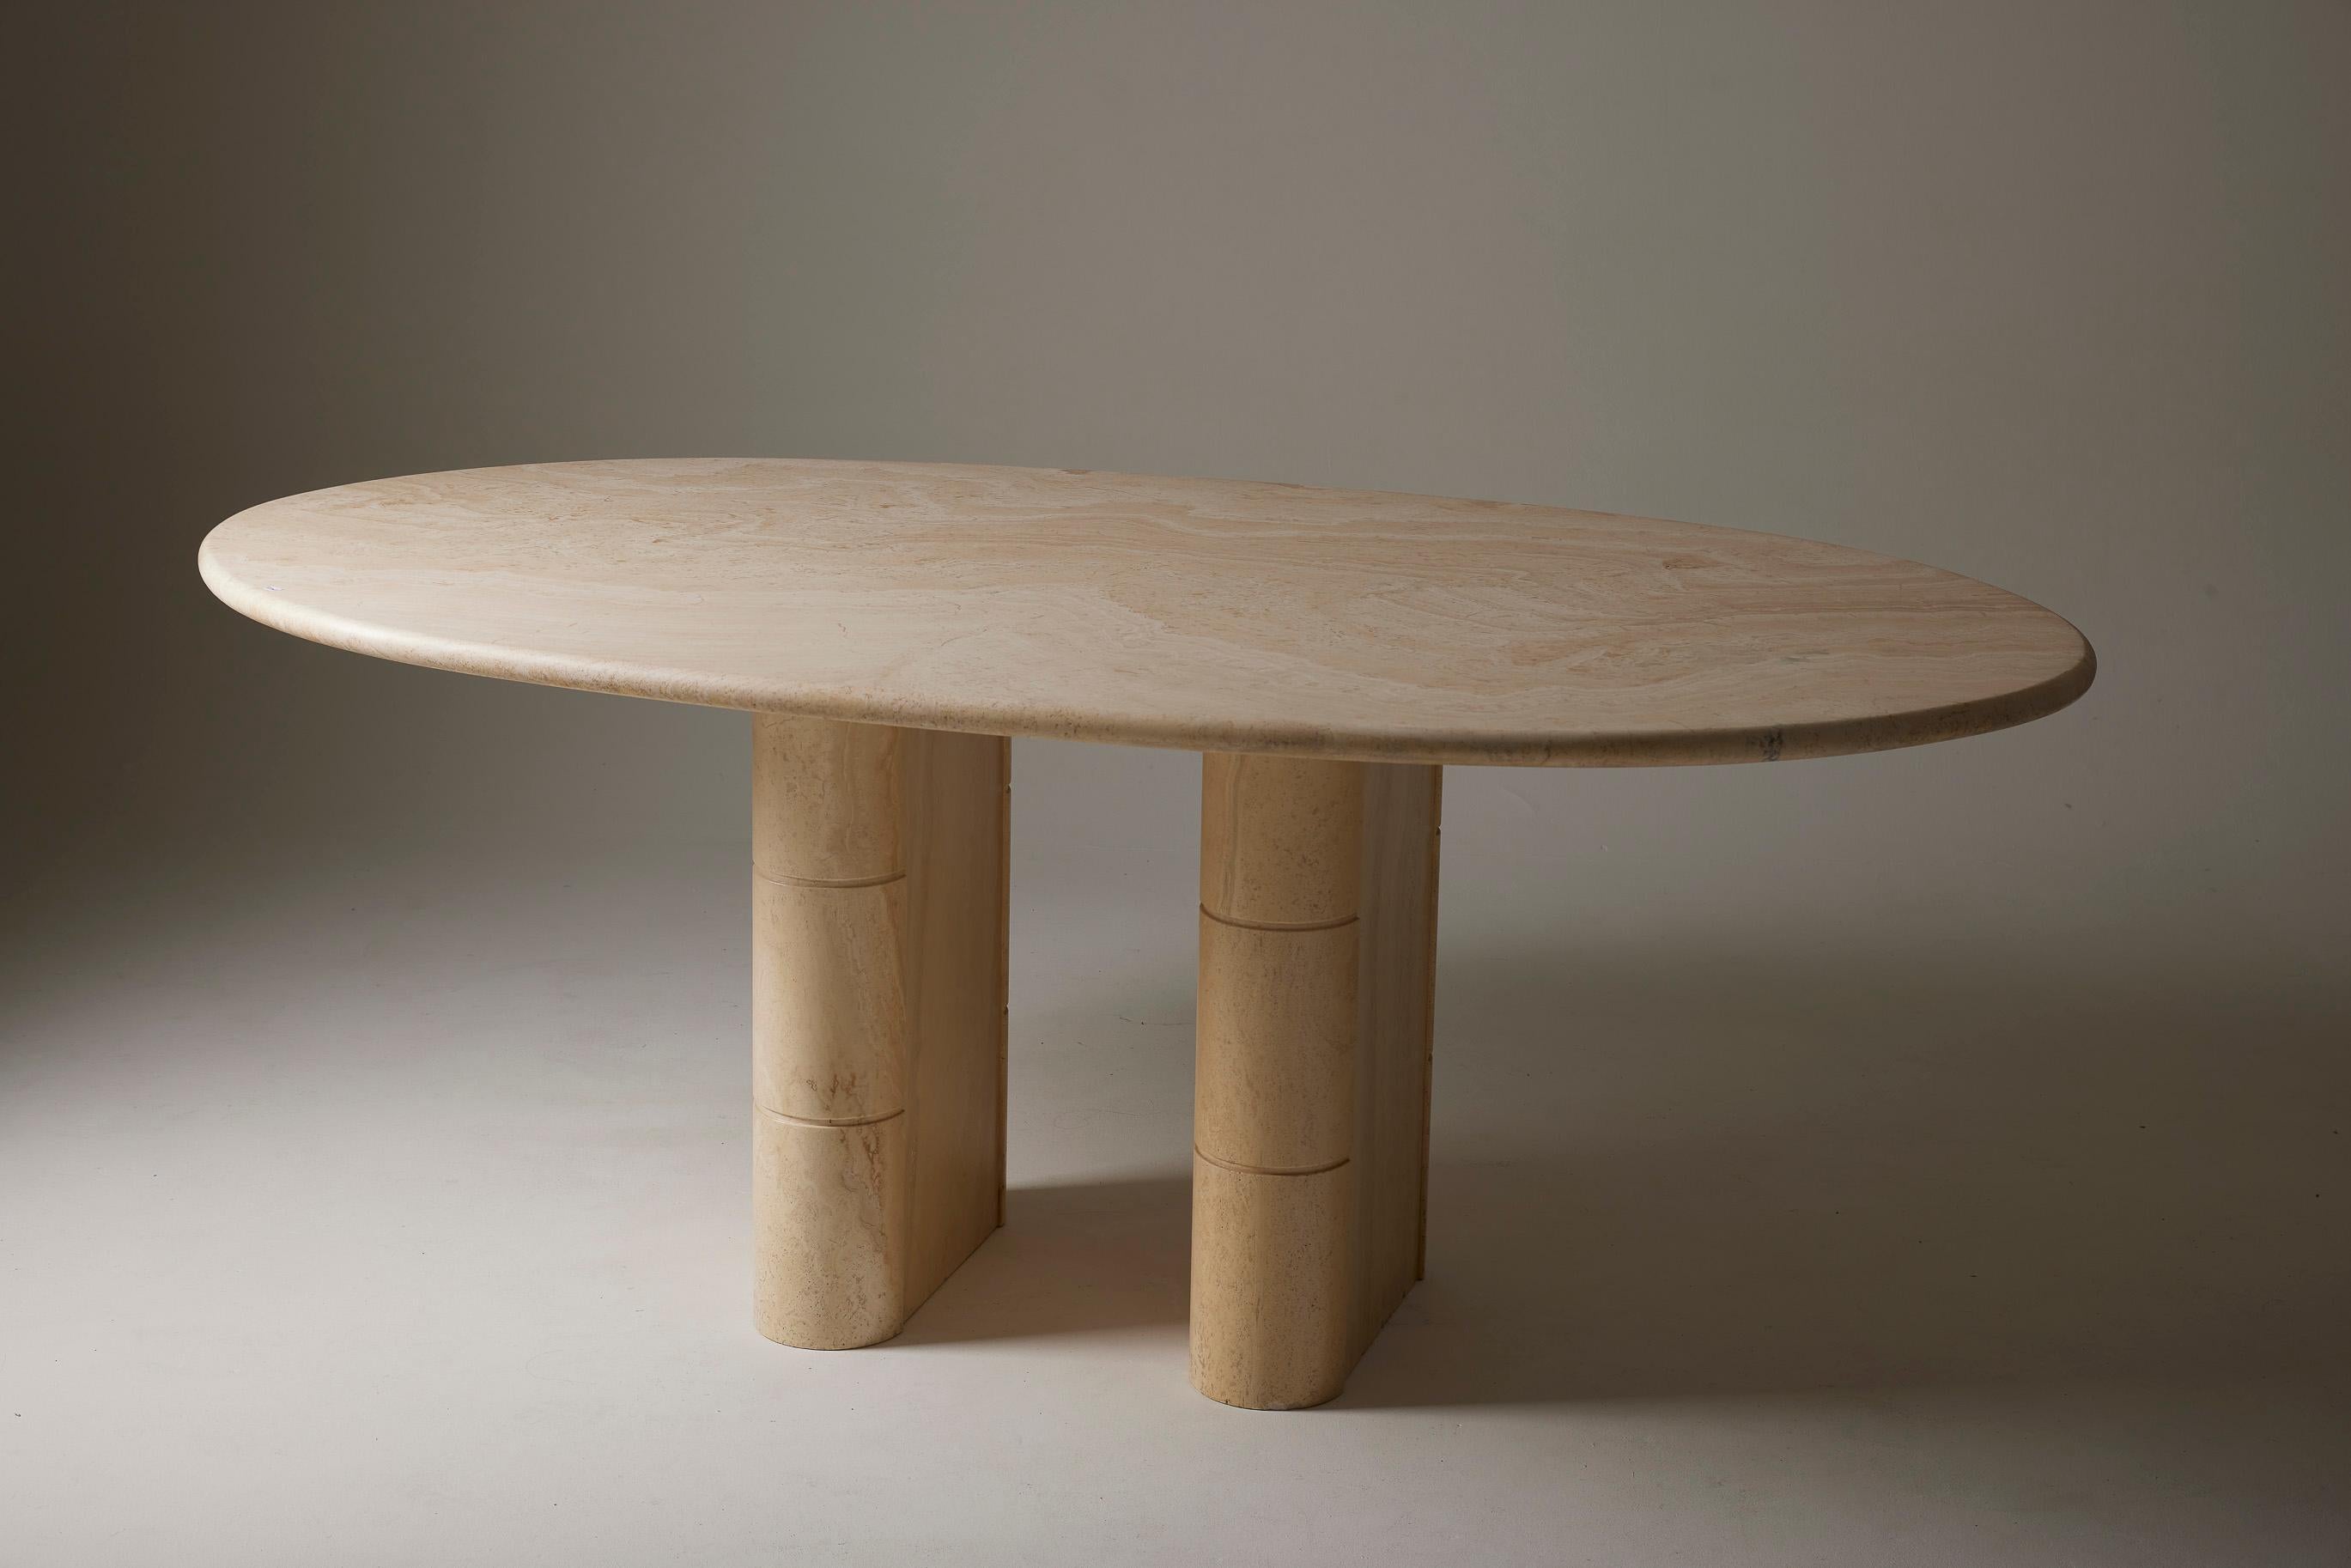 Dining table in travertine. The legs detach from the tabletop. The tabletop is oval and rests on an attractive base. In very good condition.
LP1533